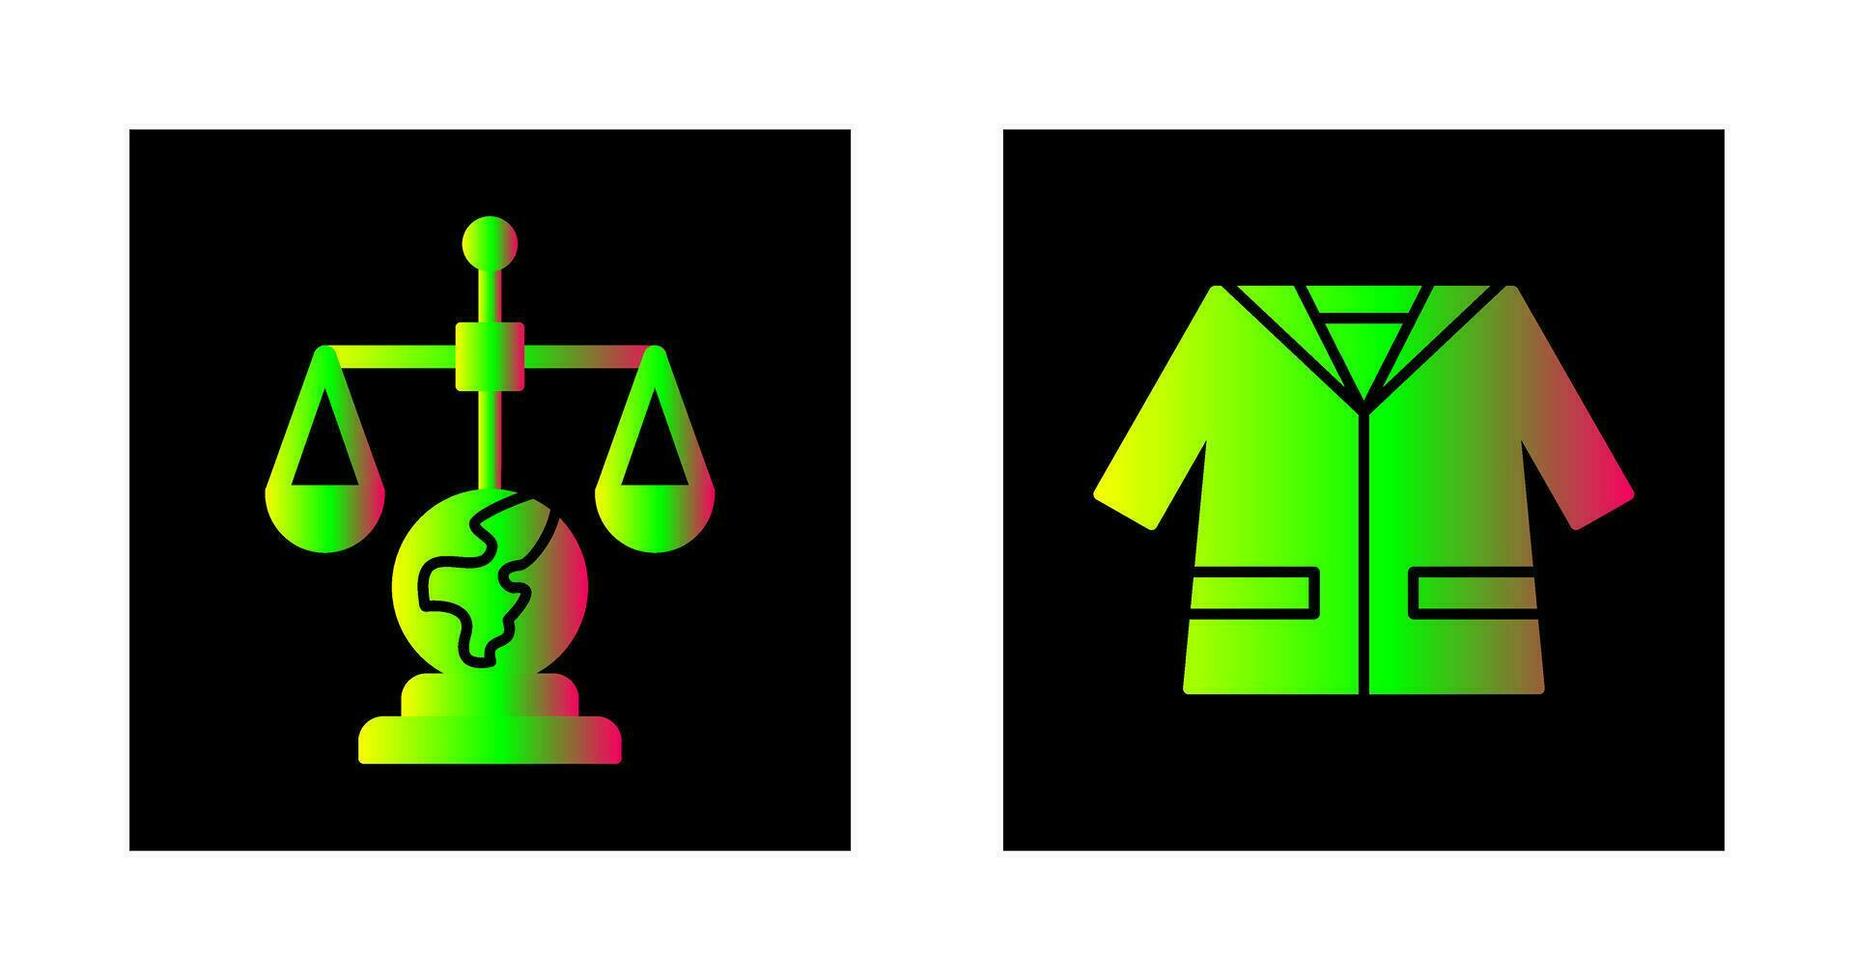 International Law and Suit Icon vector